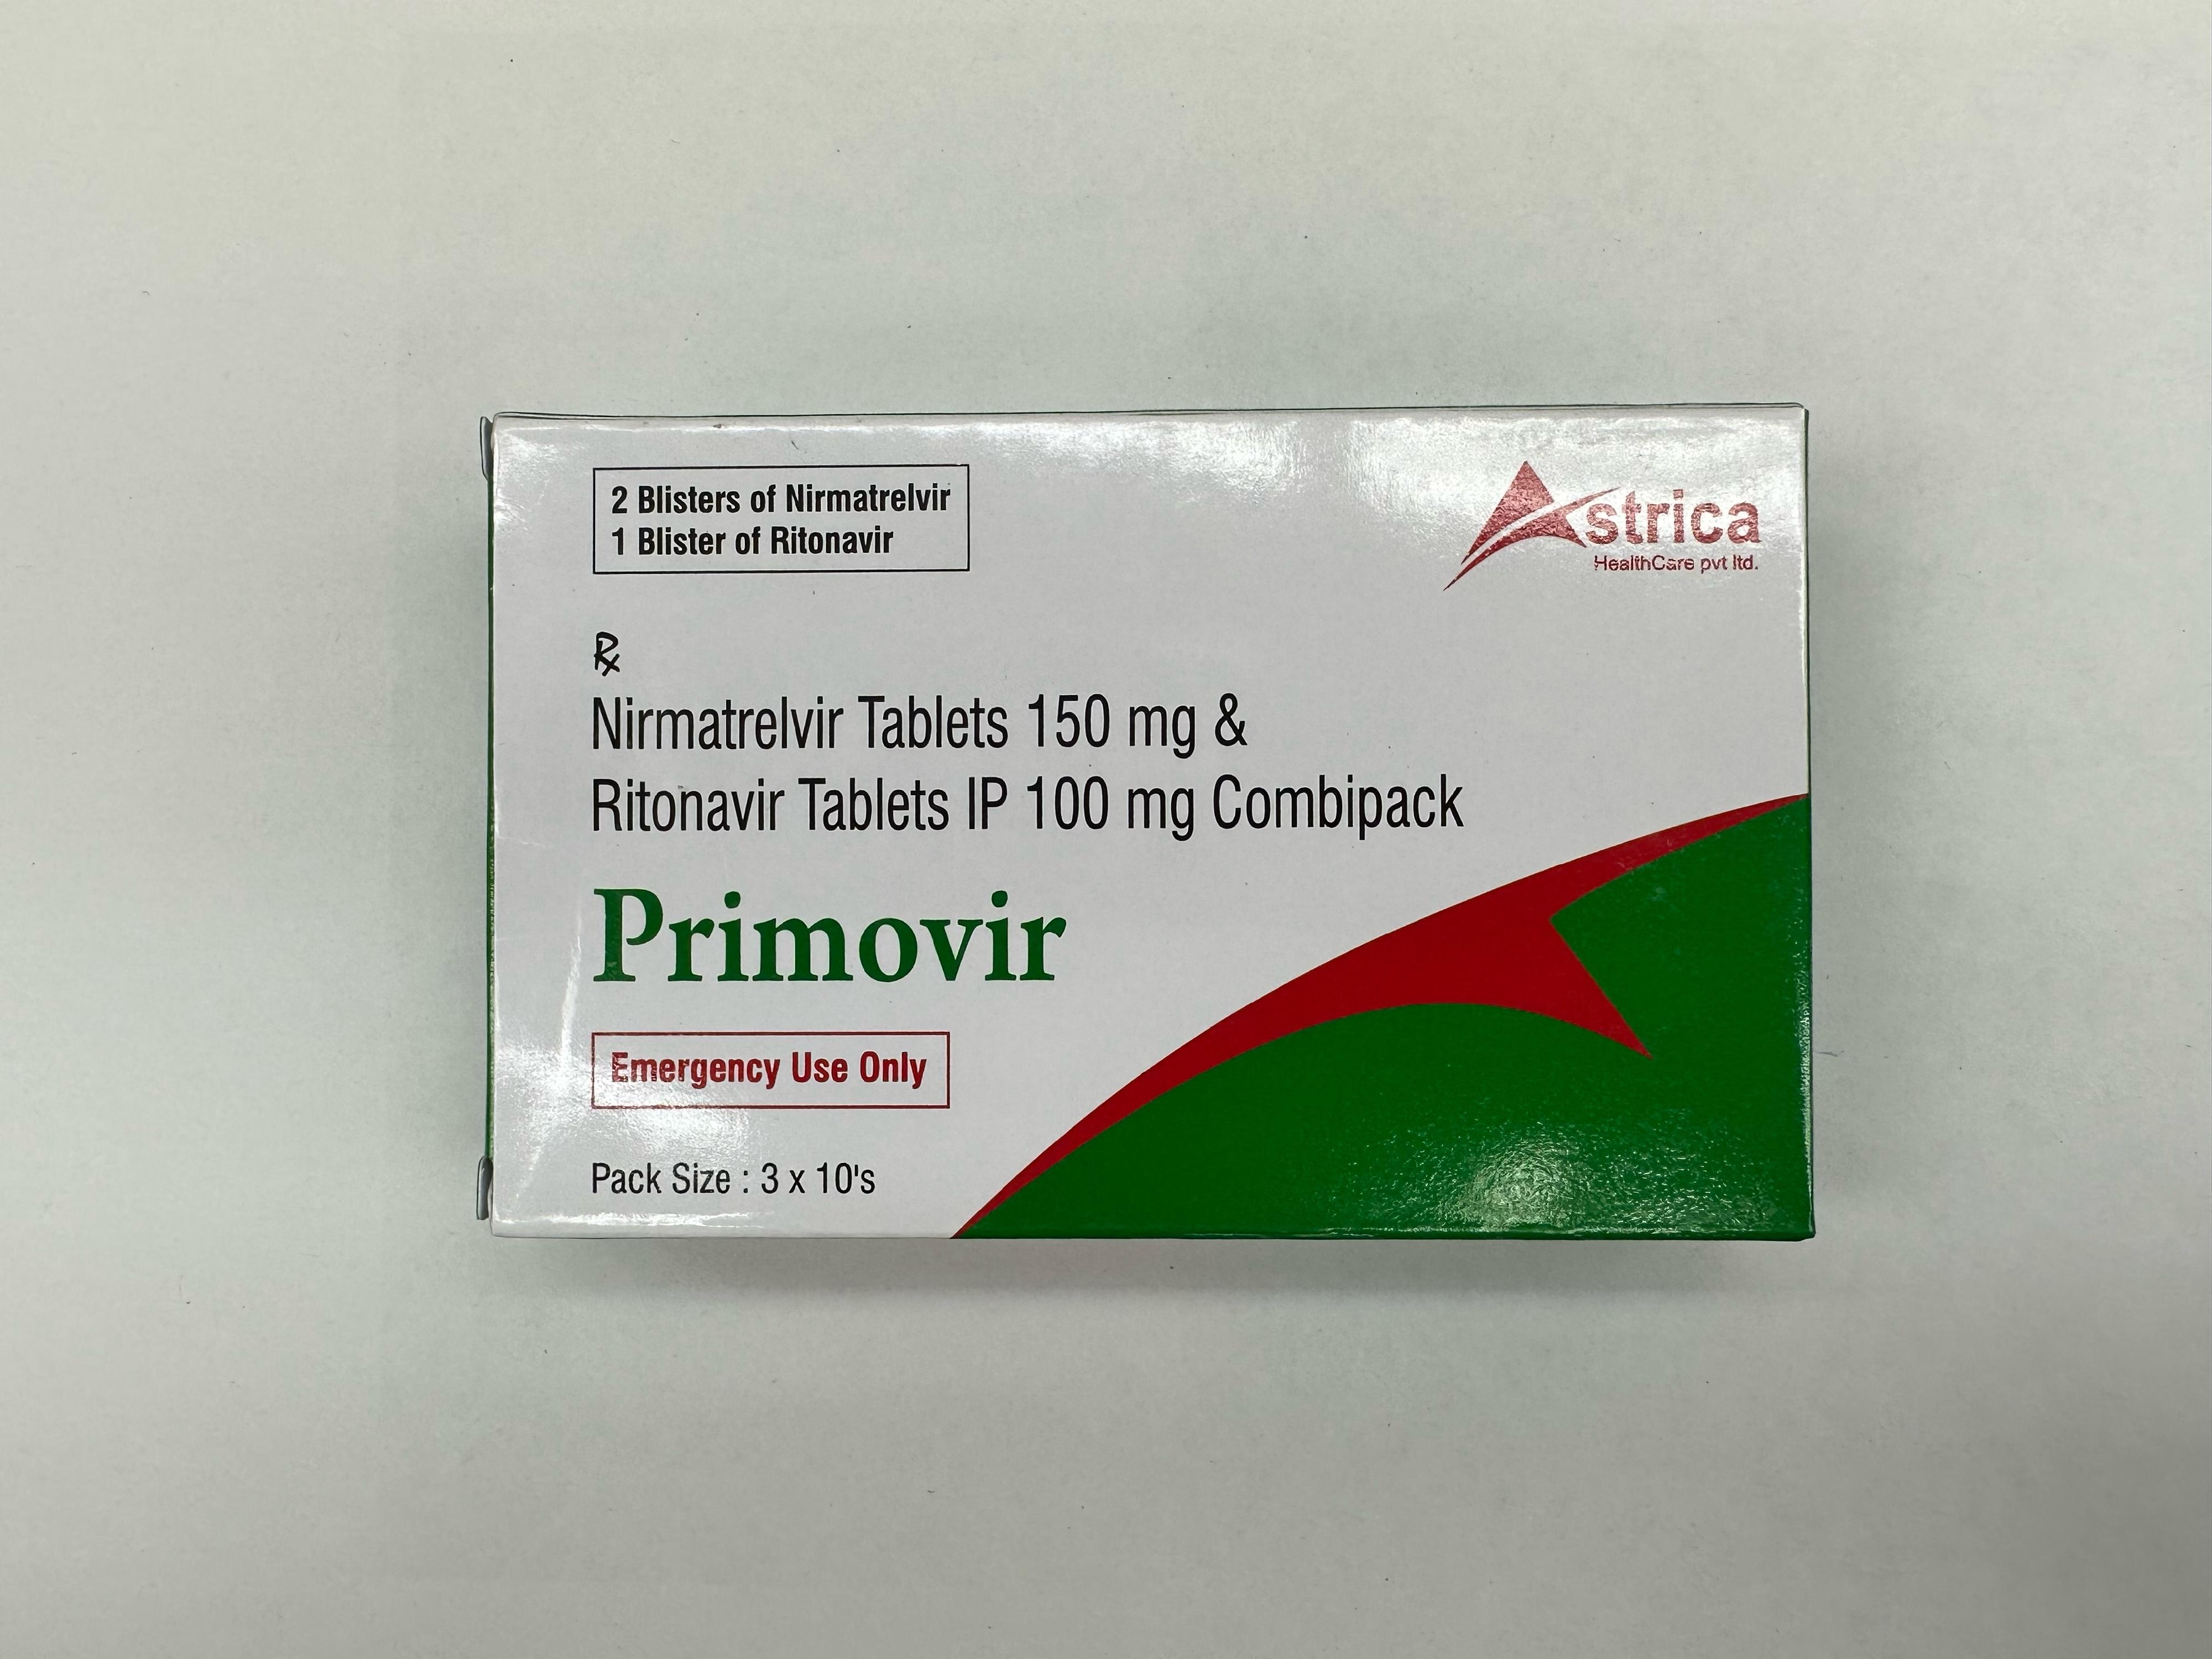 The Department of Health today (January 11) conducted a joint operation with the Police against illegal sale of COVID-19 oral drugs. During the operation, a 37-year-old man was arrested for suspected illegal sale of unregistered pharmaceutical product and a prescription drug containing Part 1 Third Schedule poison, namely Primovir. Photo shows the product involved.